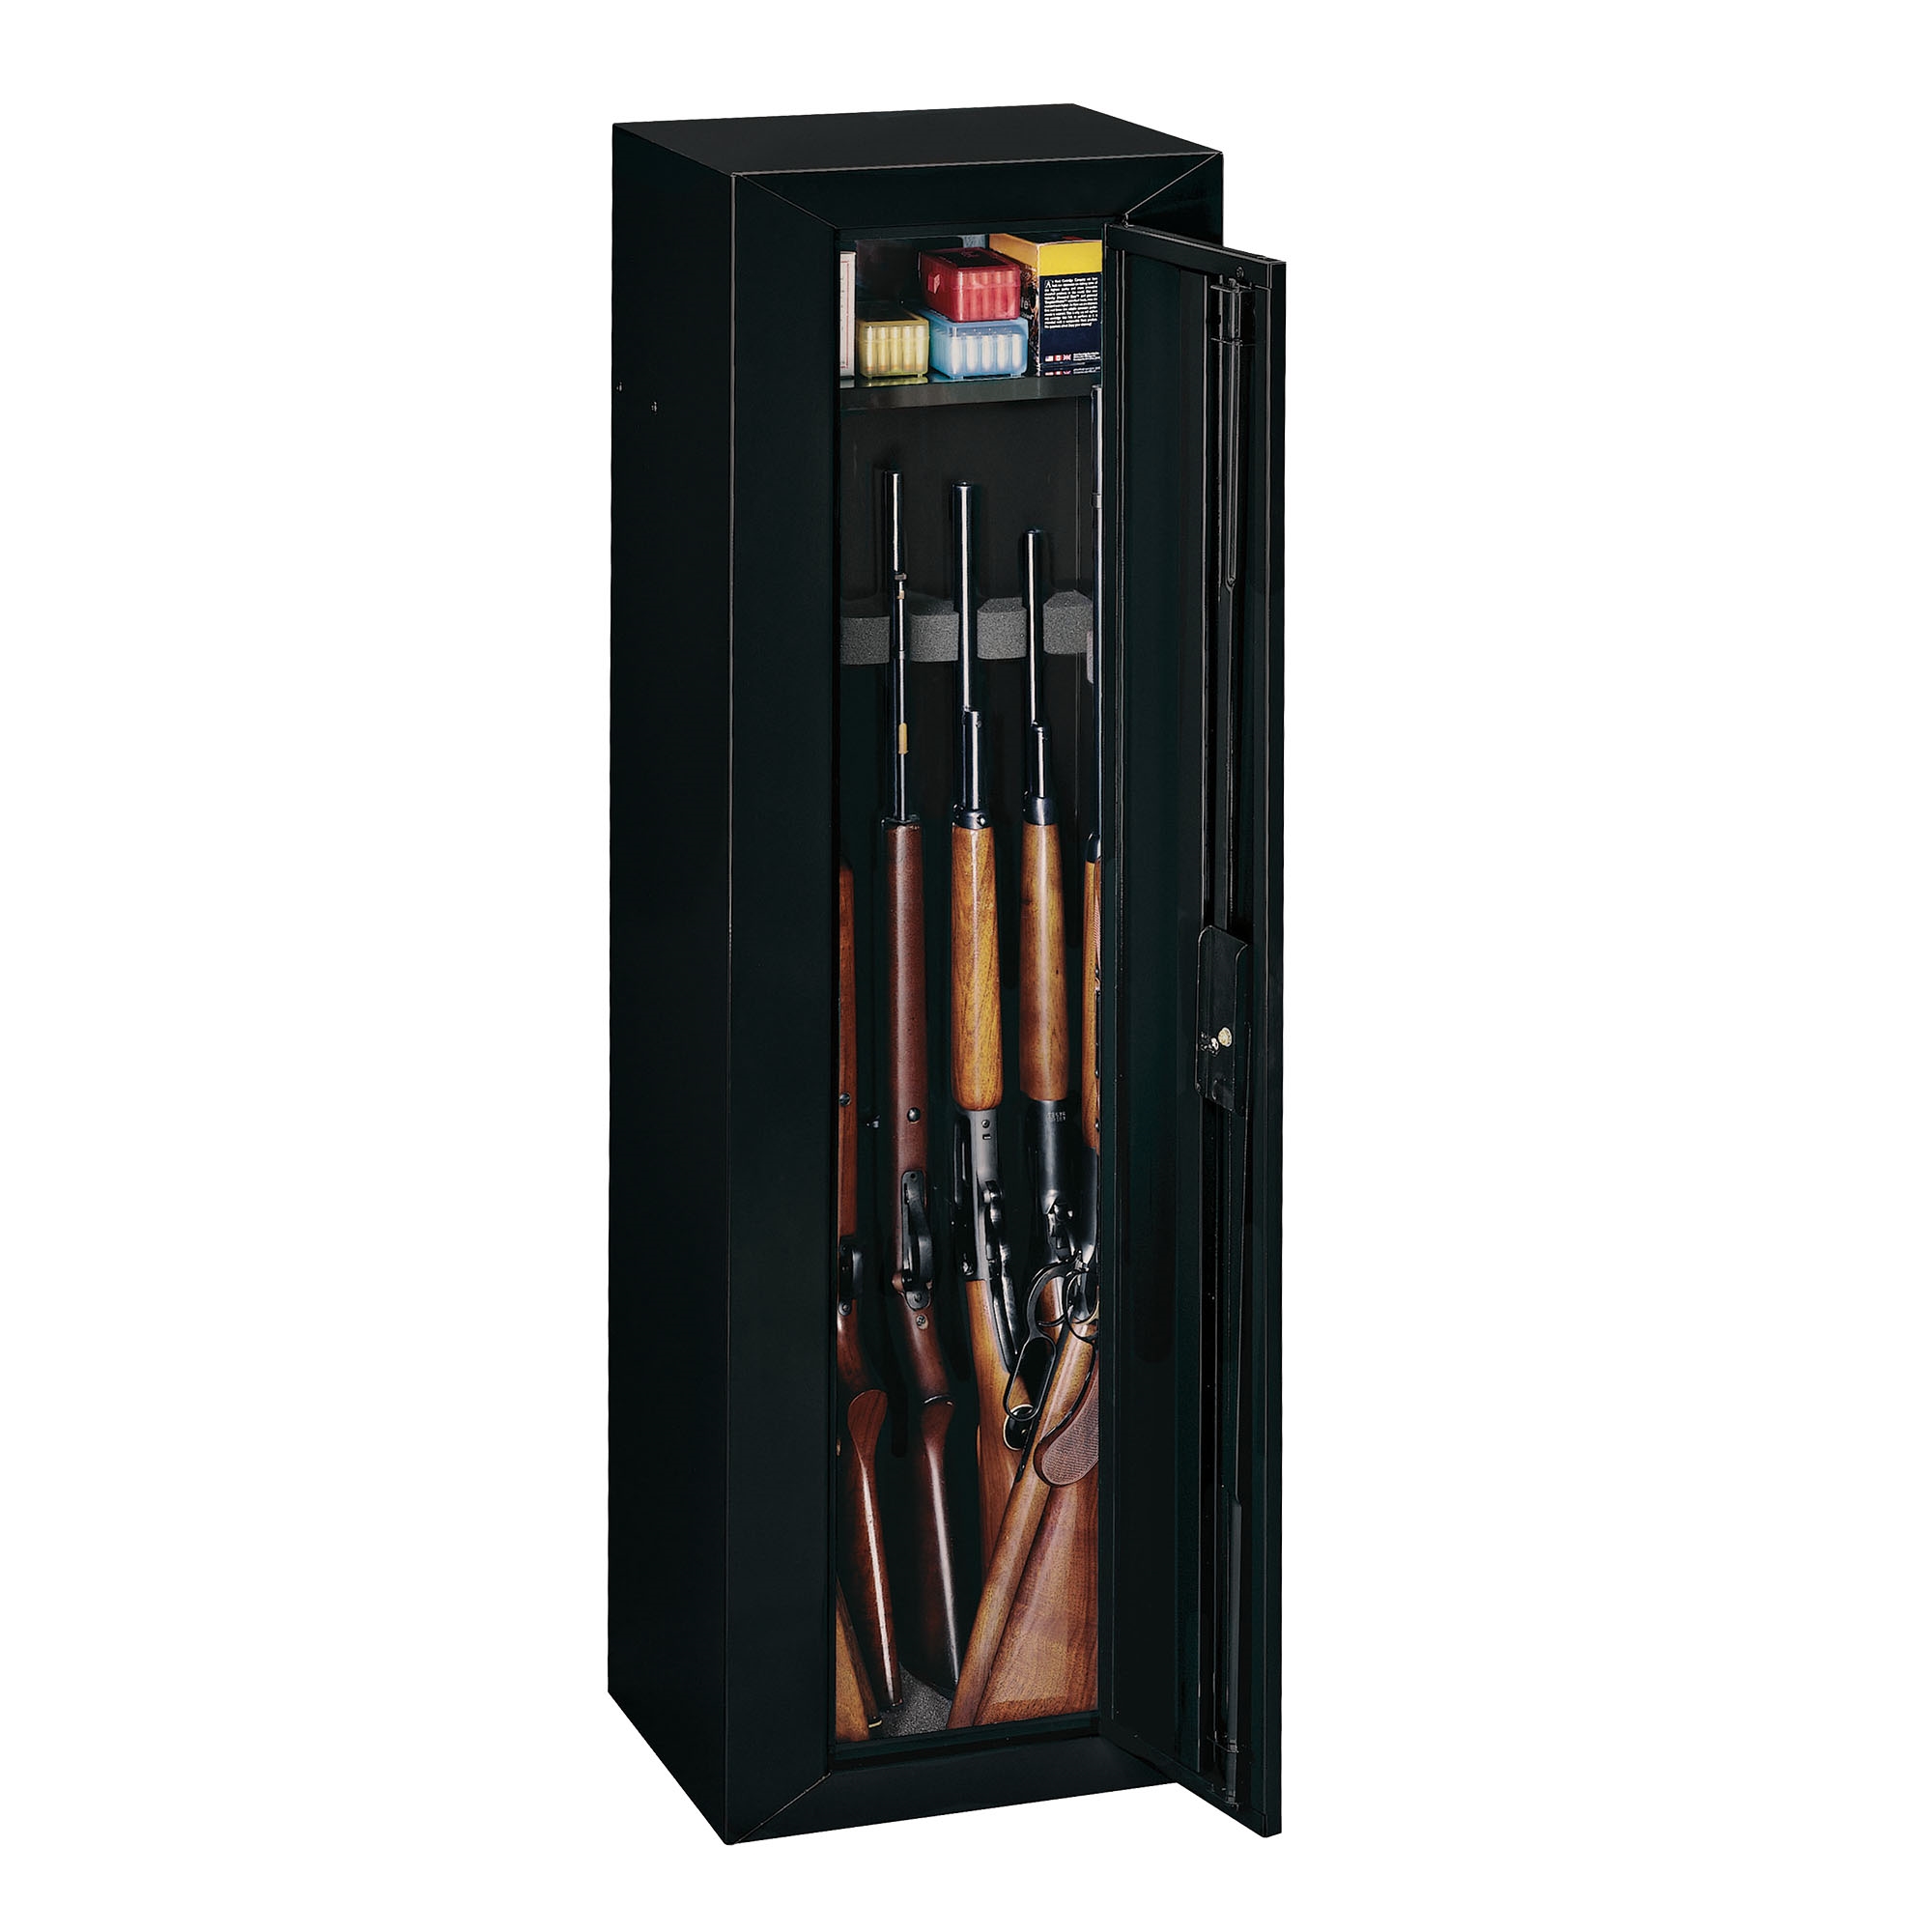 STACK-ON GCB-910 Security Cabinet, Steel, Black, Gloss, Double Bitted Key Lock, 1-Compartment - 2